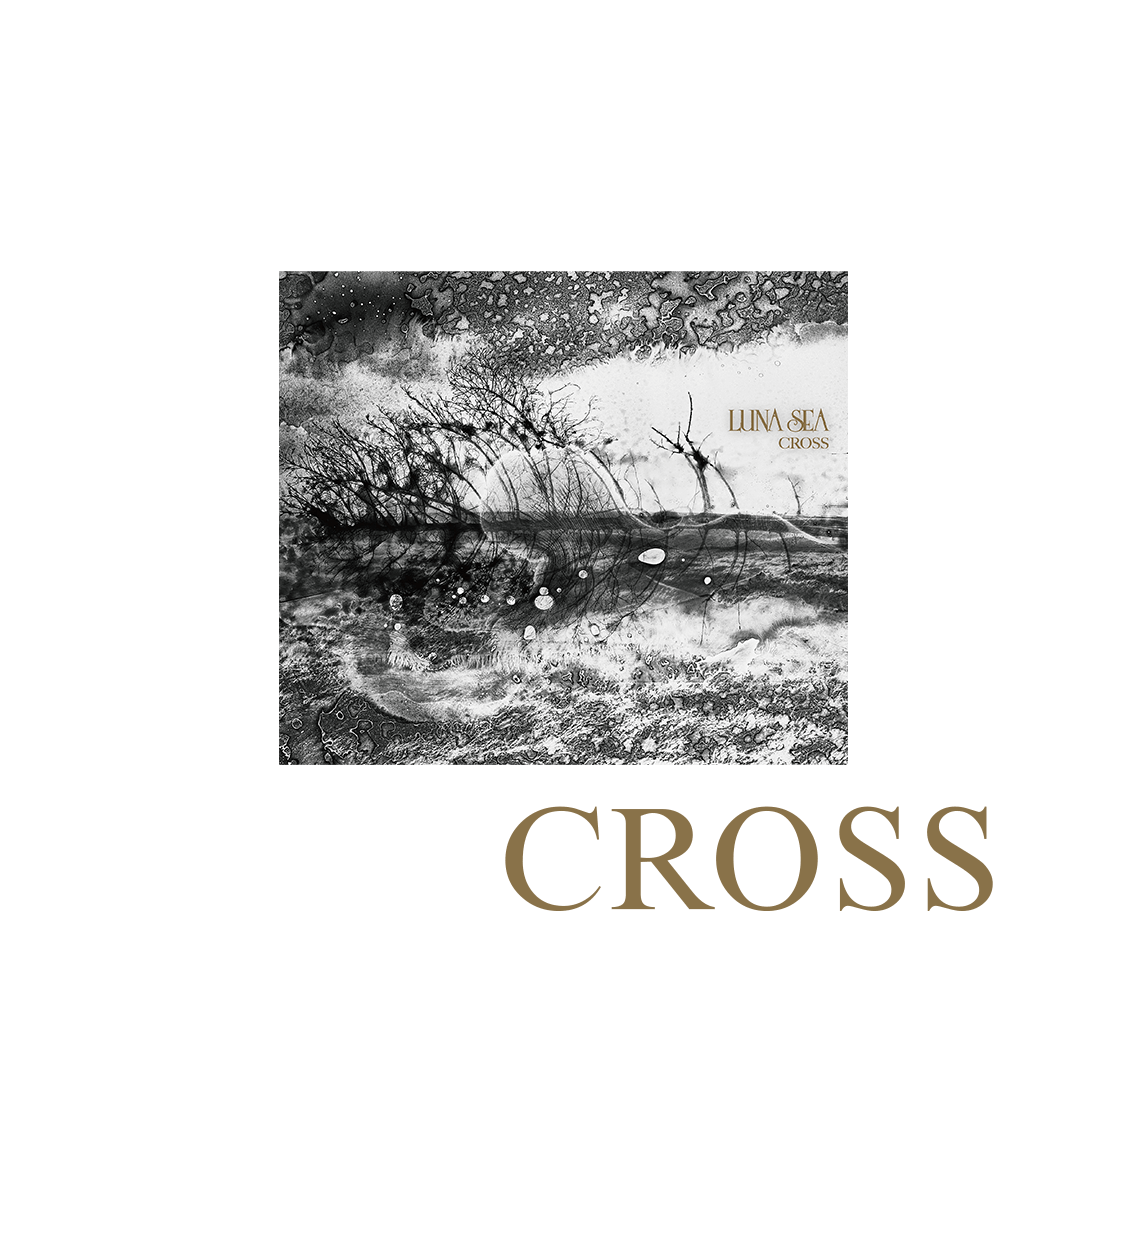 LUNA SEA NEW ALBUM「CROSS」18th Dec,wed Release！ Set to release on our 30th anniversary year, 10th studio album “CROSS” is finally finished!Co-Produced by five-times Grammy winner Steve Lillywhite!